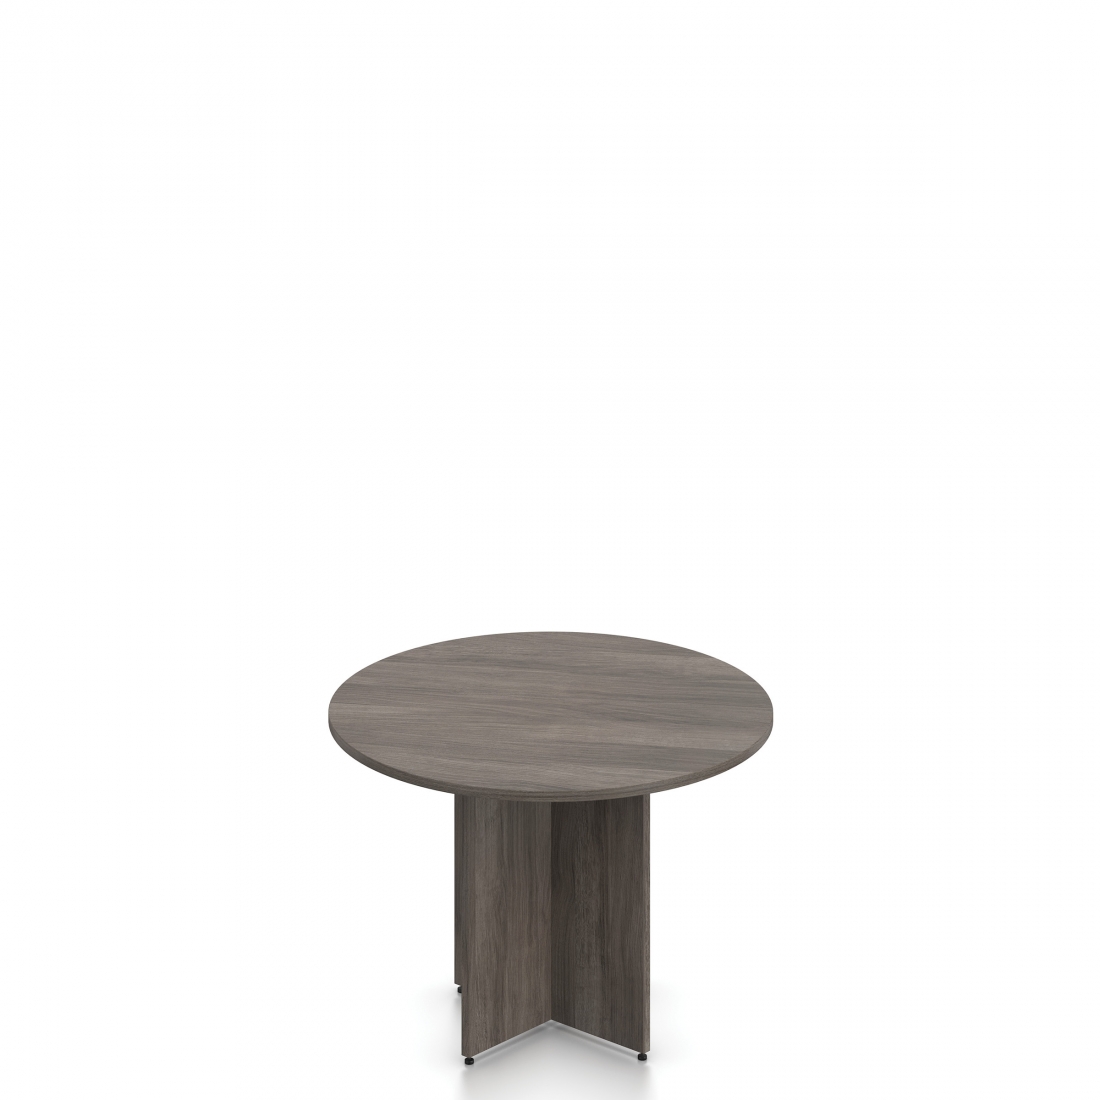 42” Round Table